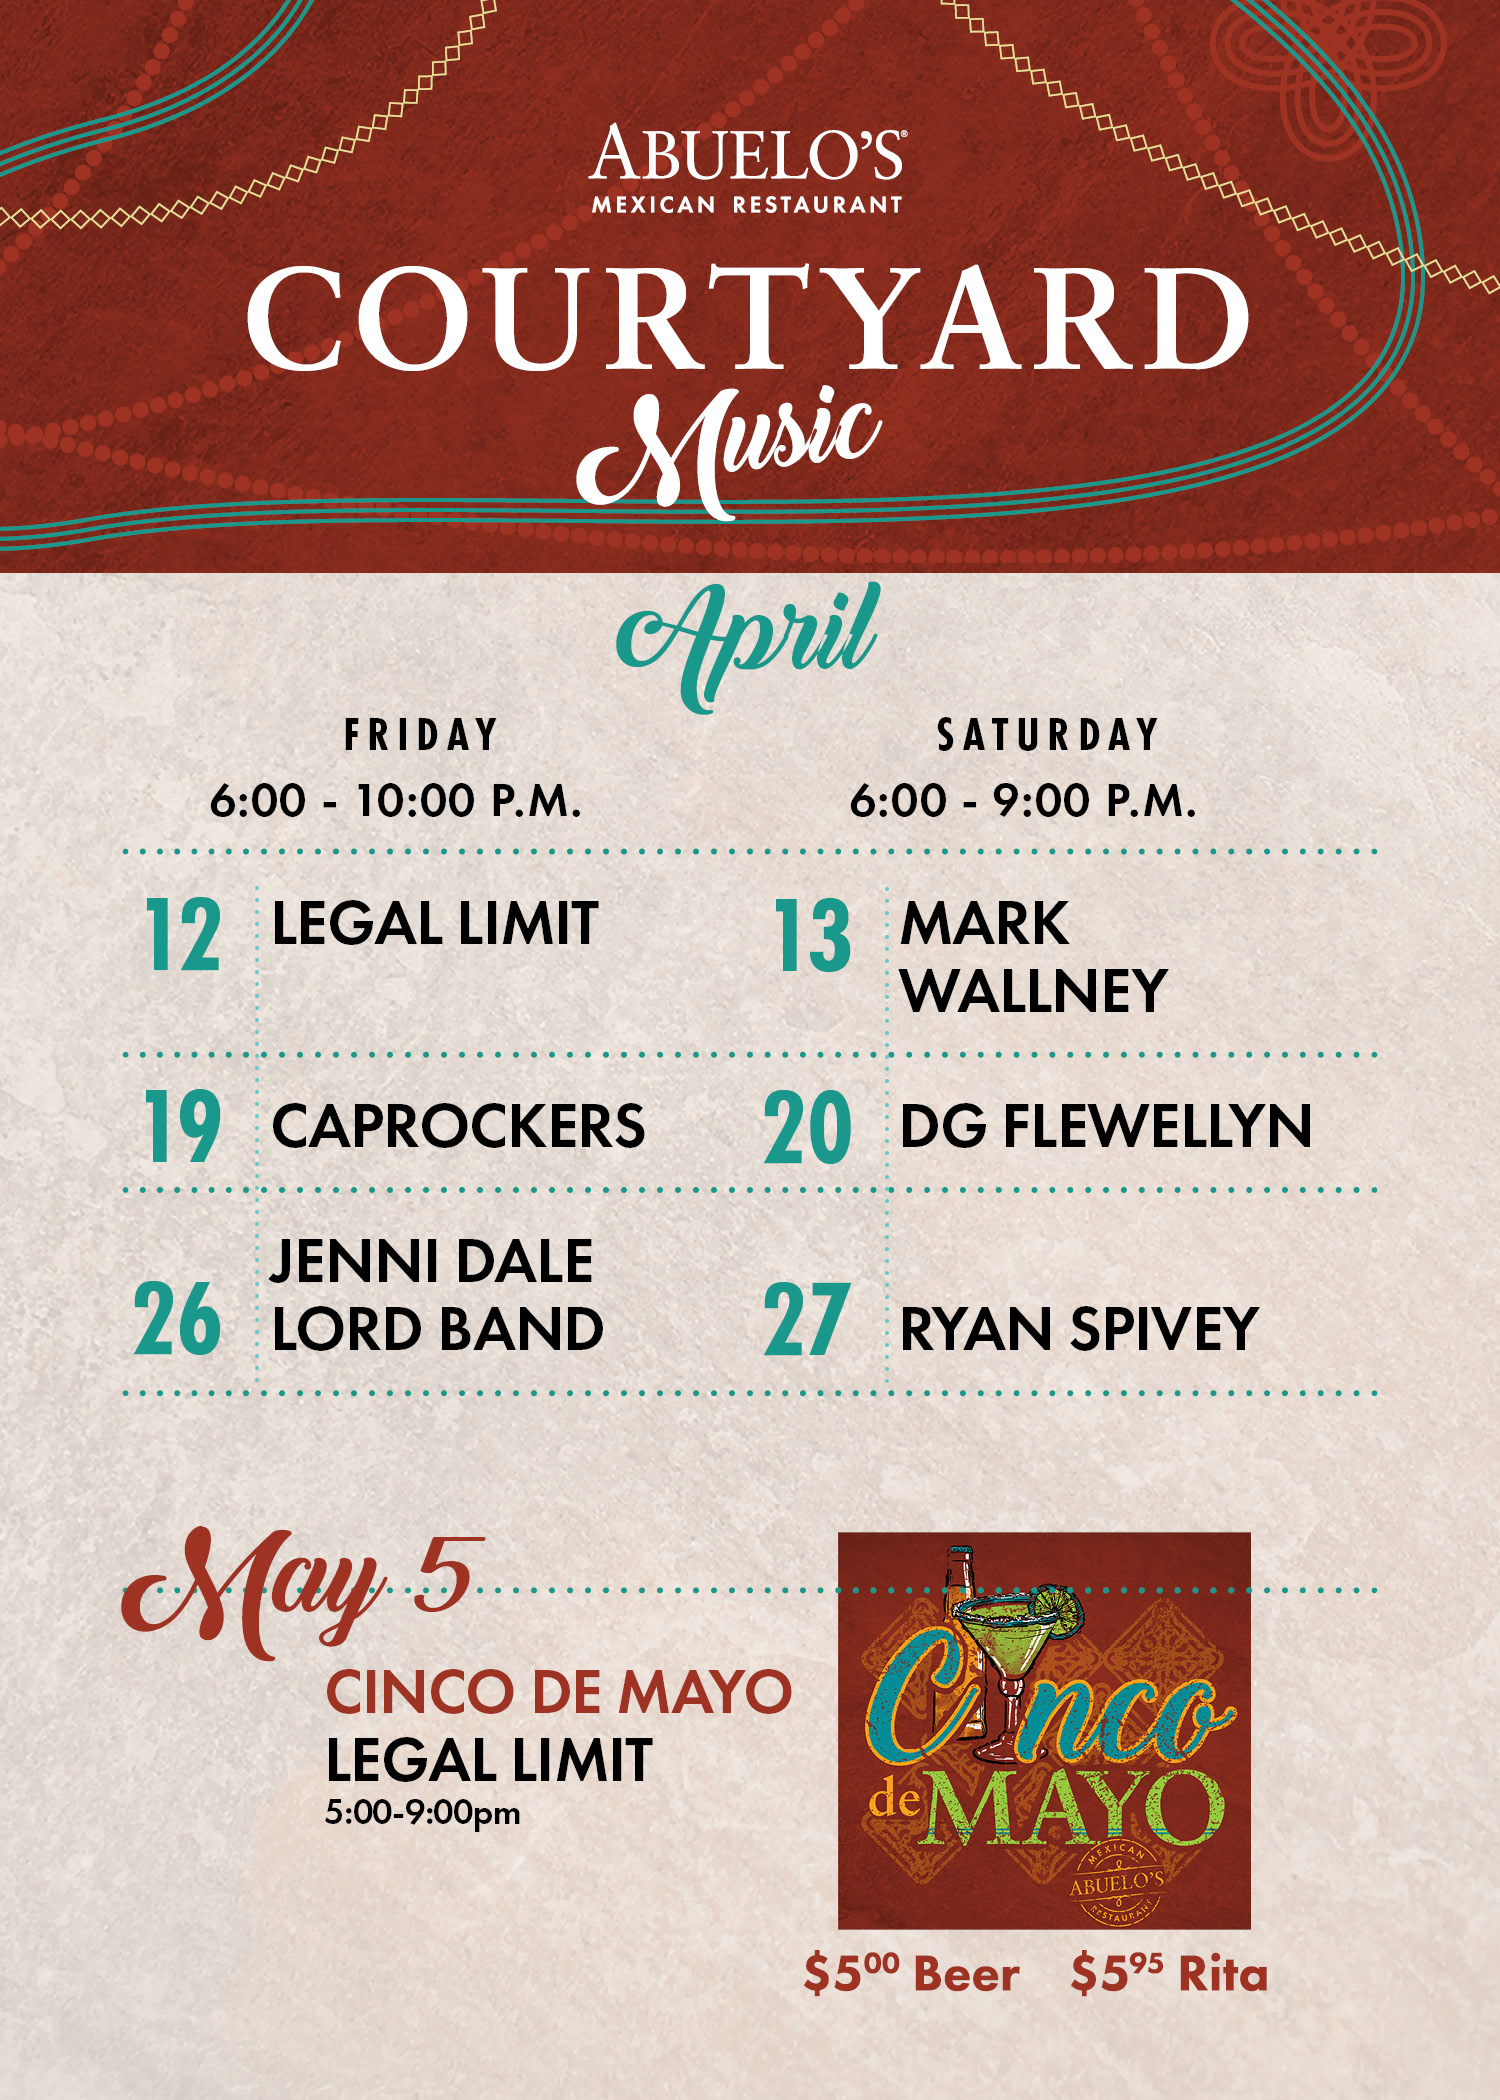 Abuelo's Live Music in the Courtyard, April schedule.